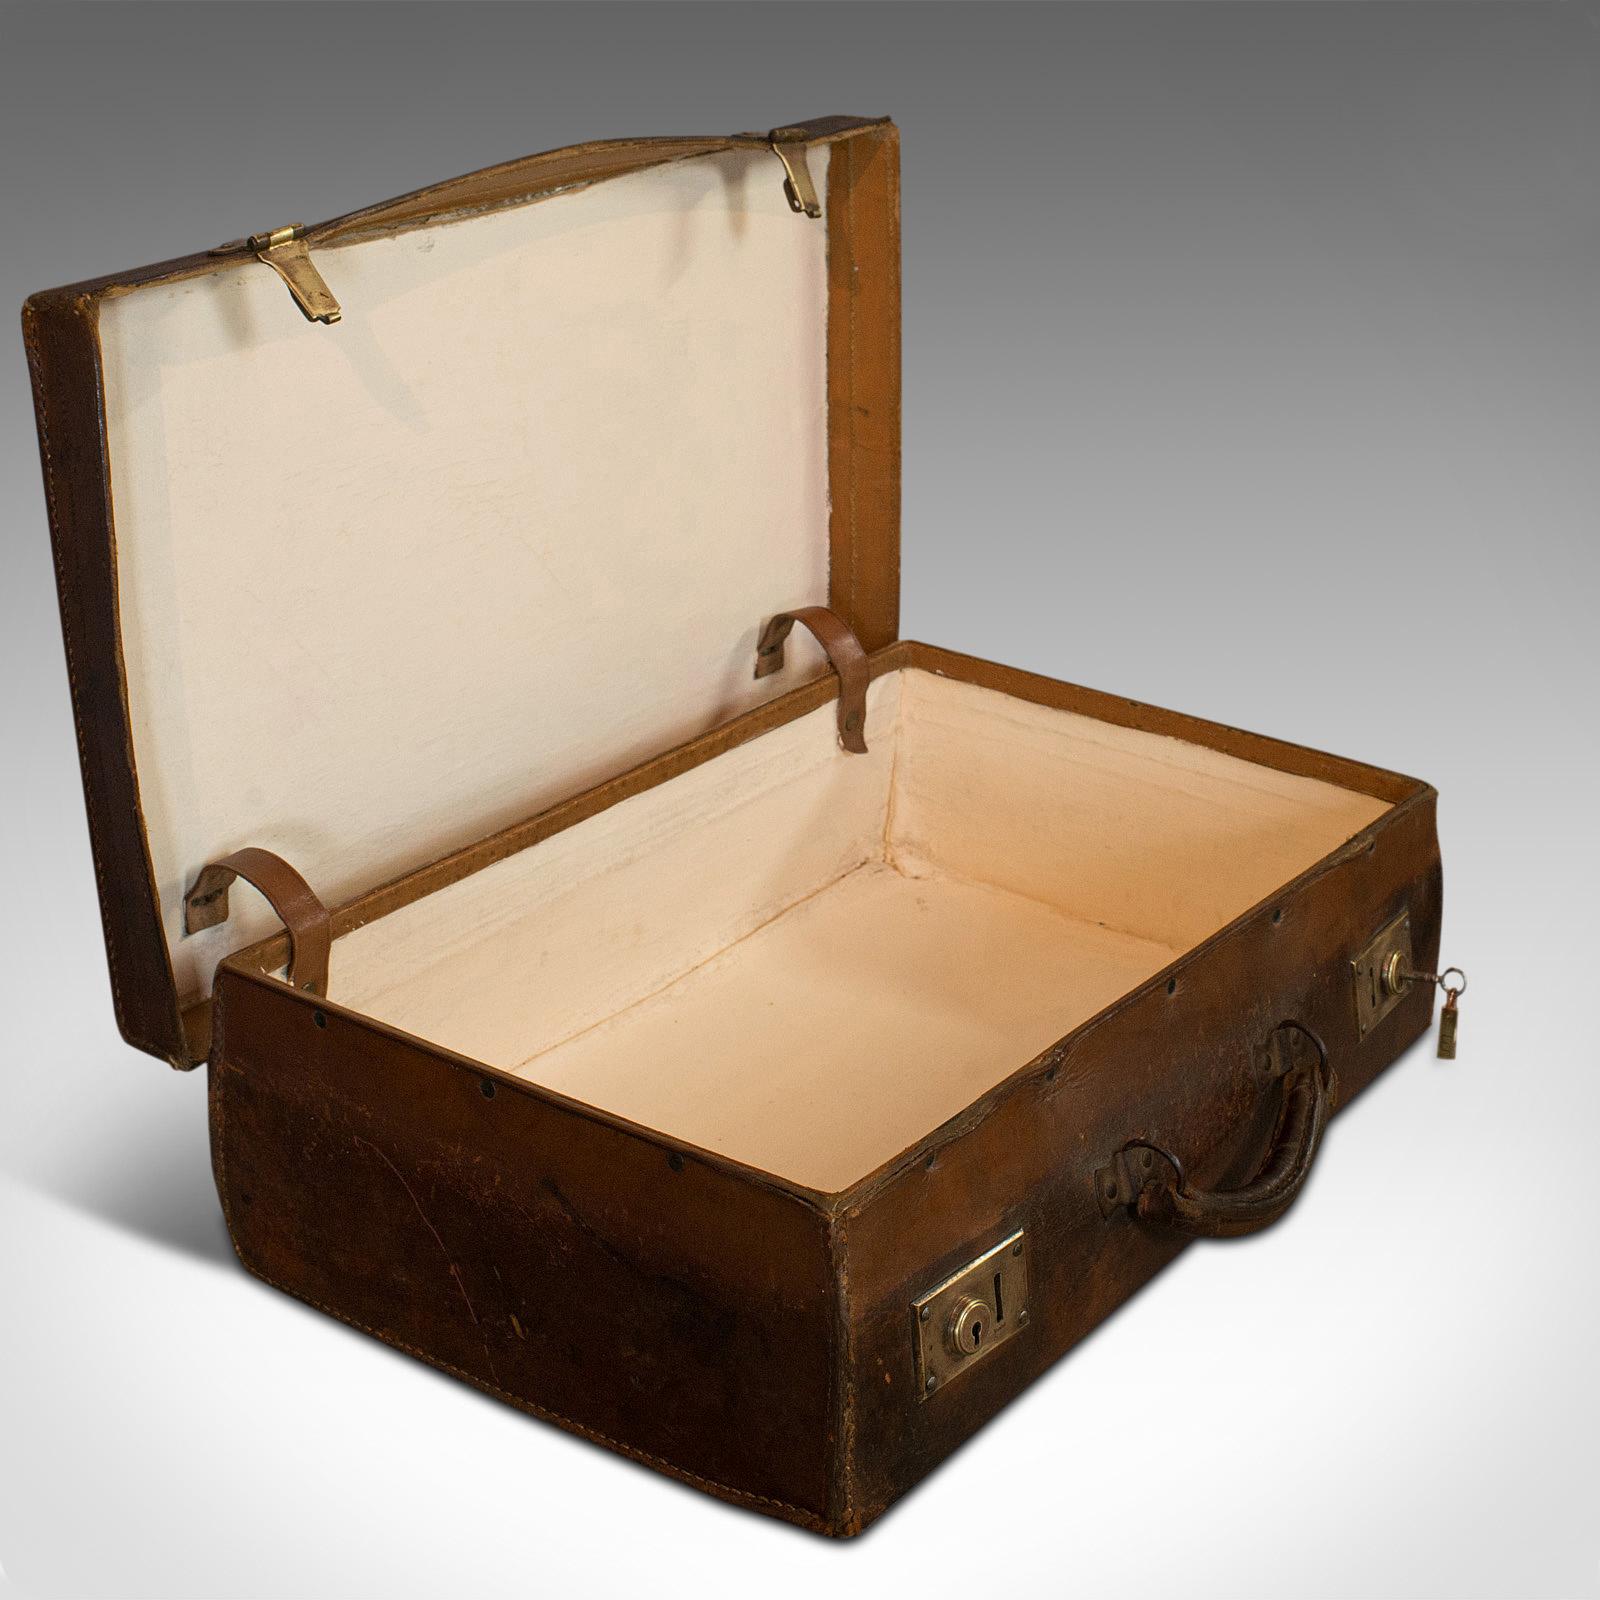 Our stock # 18.6520

This is an antique salesman's case. An English, leather-bound travel suitcase, dating to the Edwardian period, circa 1910.

A splendid travel companion
Displays a desirable aged patina
Leather bound with quality double